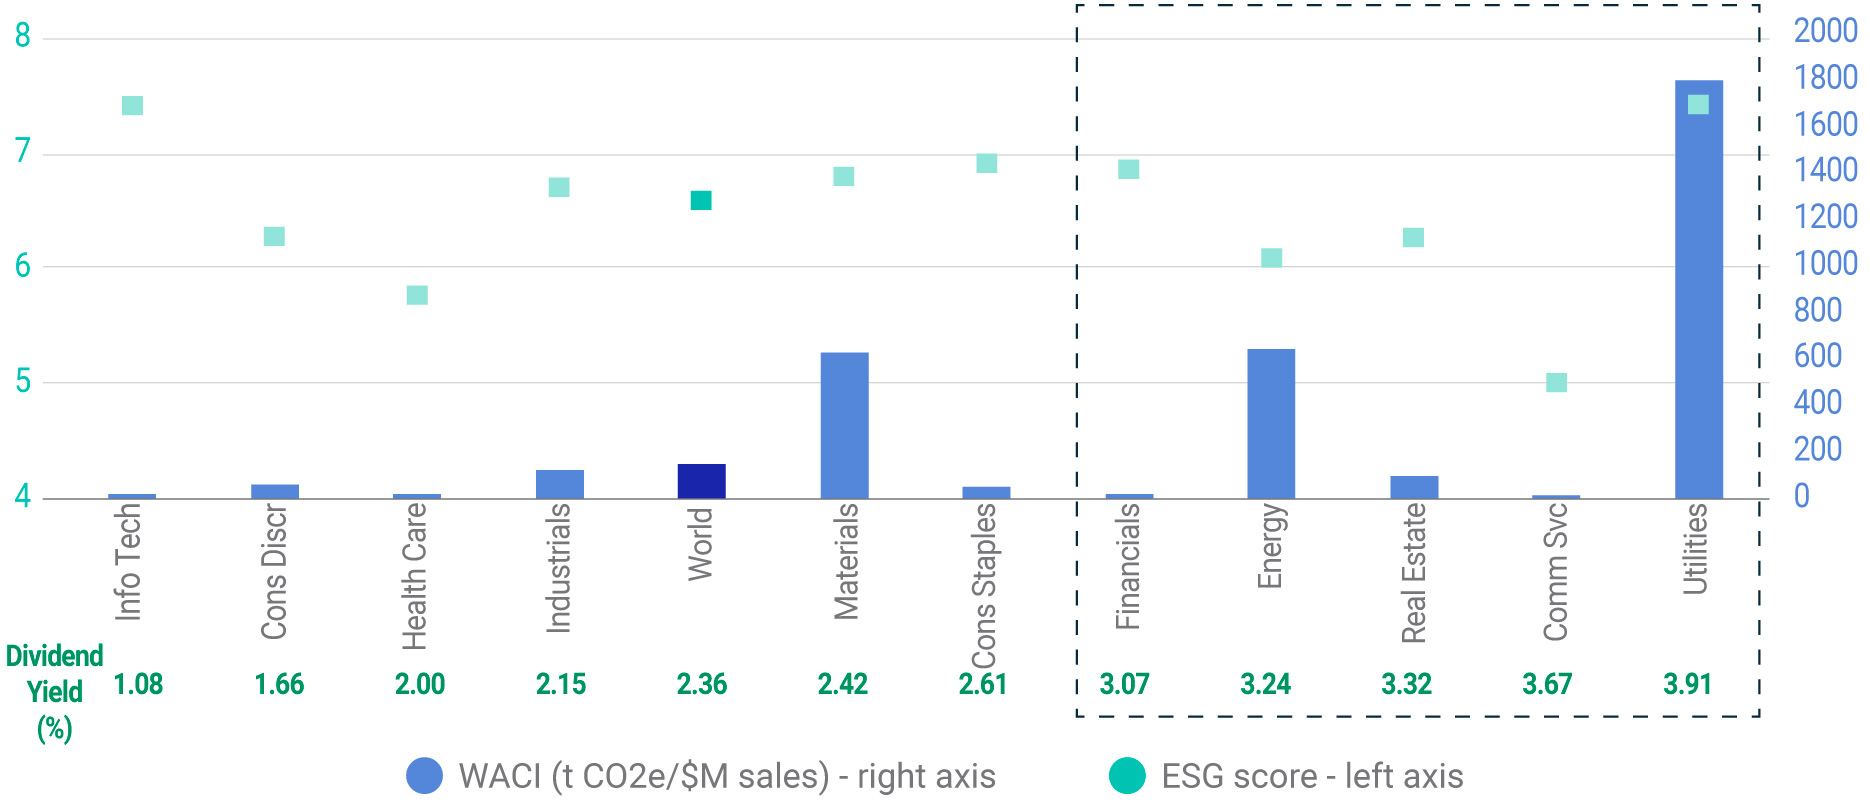 The relationship between average dividend yield, MSCI ESG Score and weighted average carbon intensity (WACI)  across GICS® sectors of the MSCI World universe